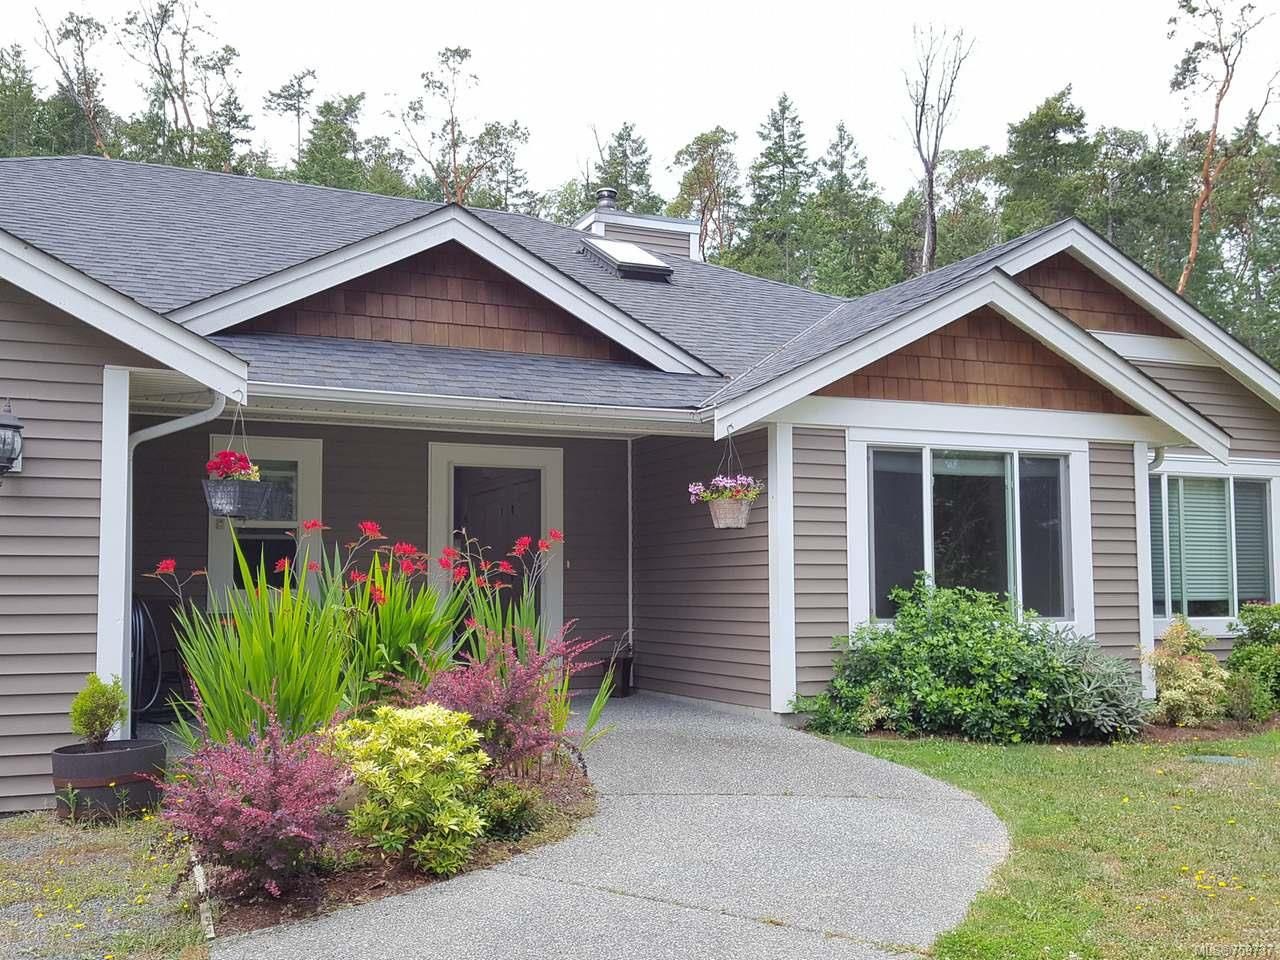 Main Photo: 1960 Rena Rd in NANOOSE BAY: PQ Nanoose House for sale (Parksville/Qualicum)  : MLS®# 759737